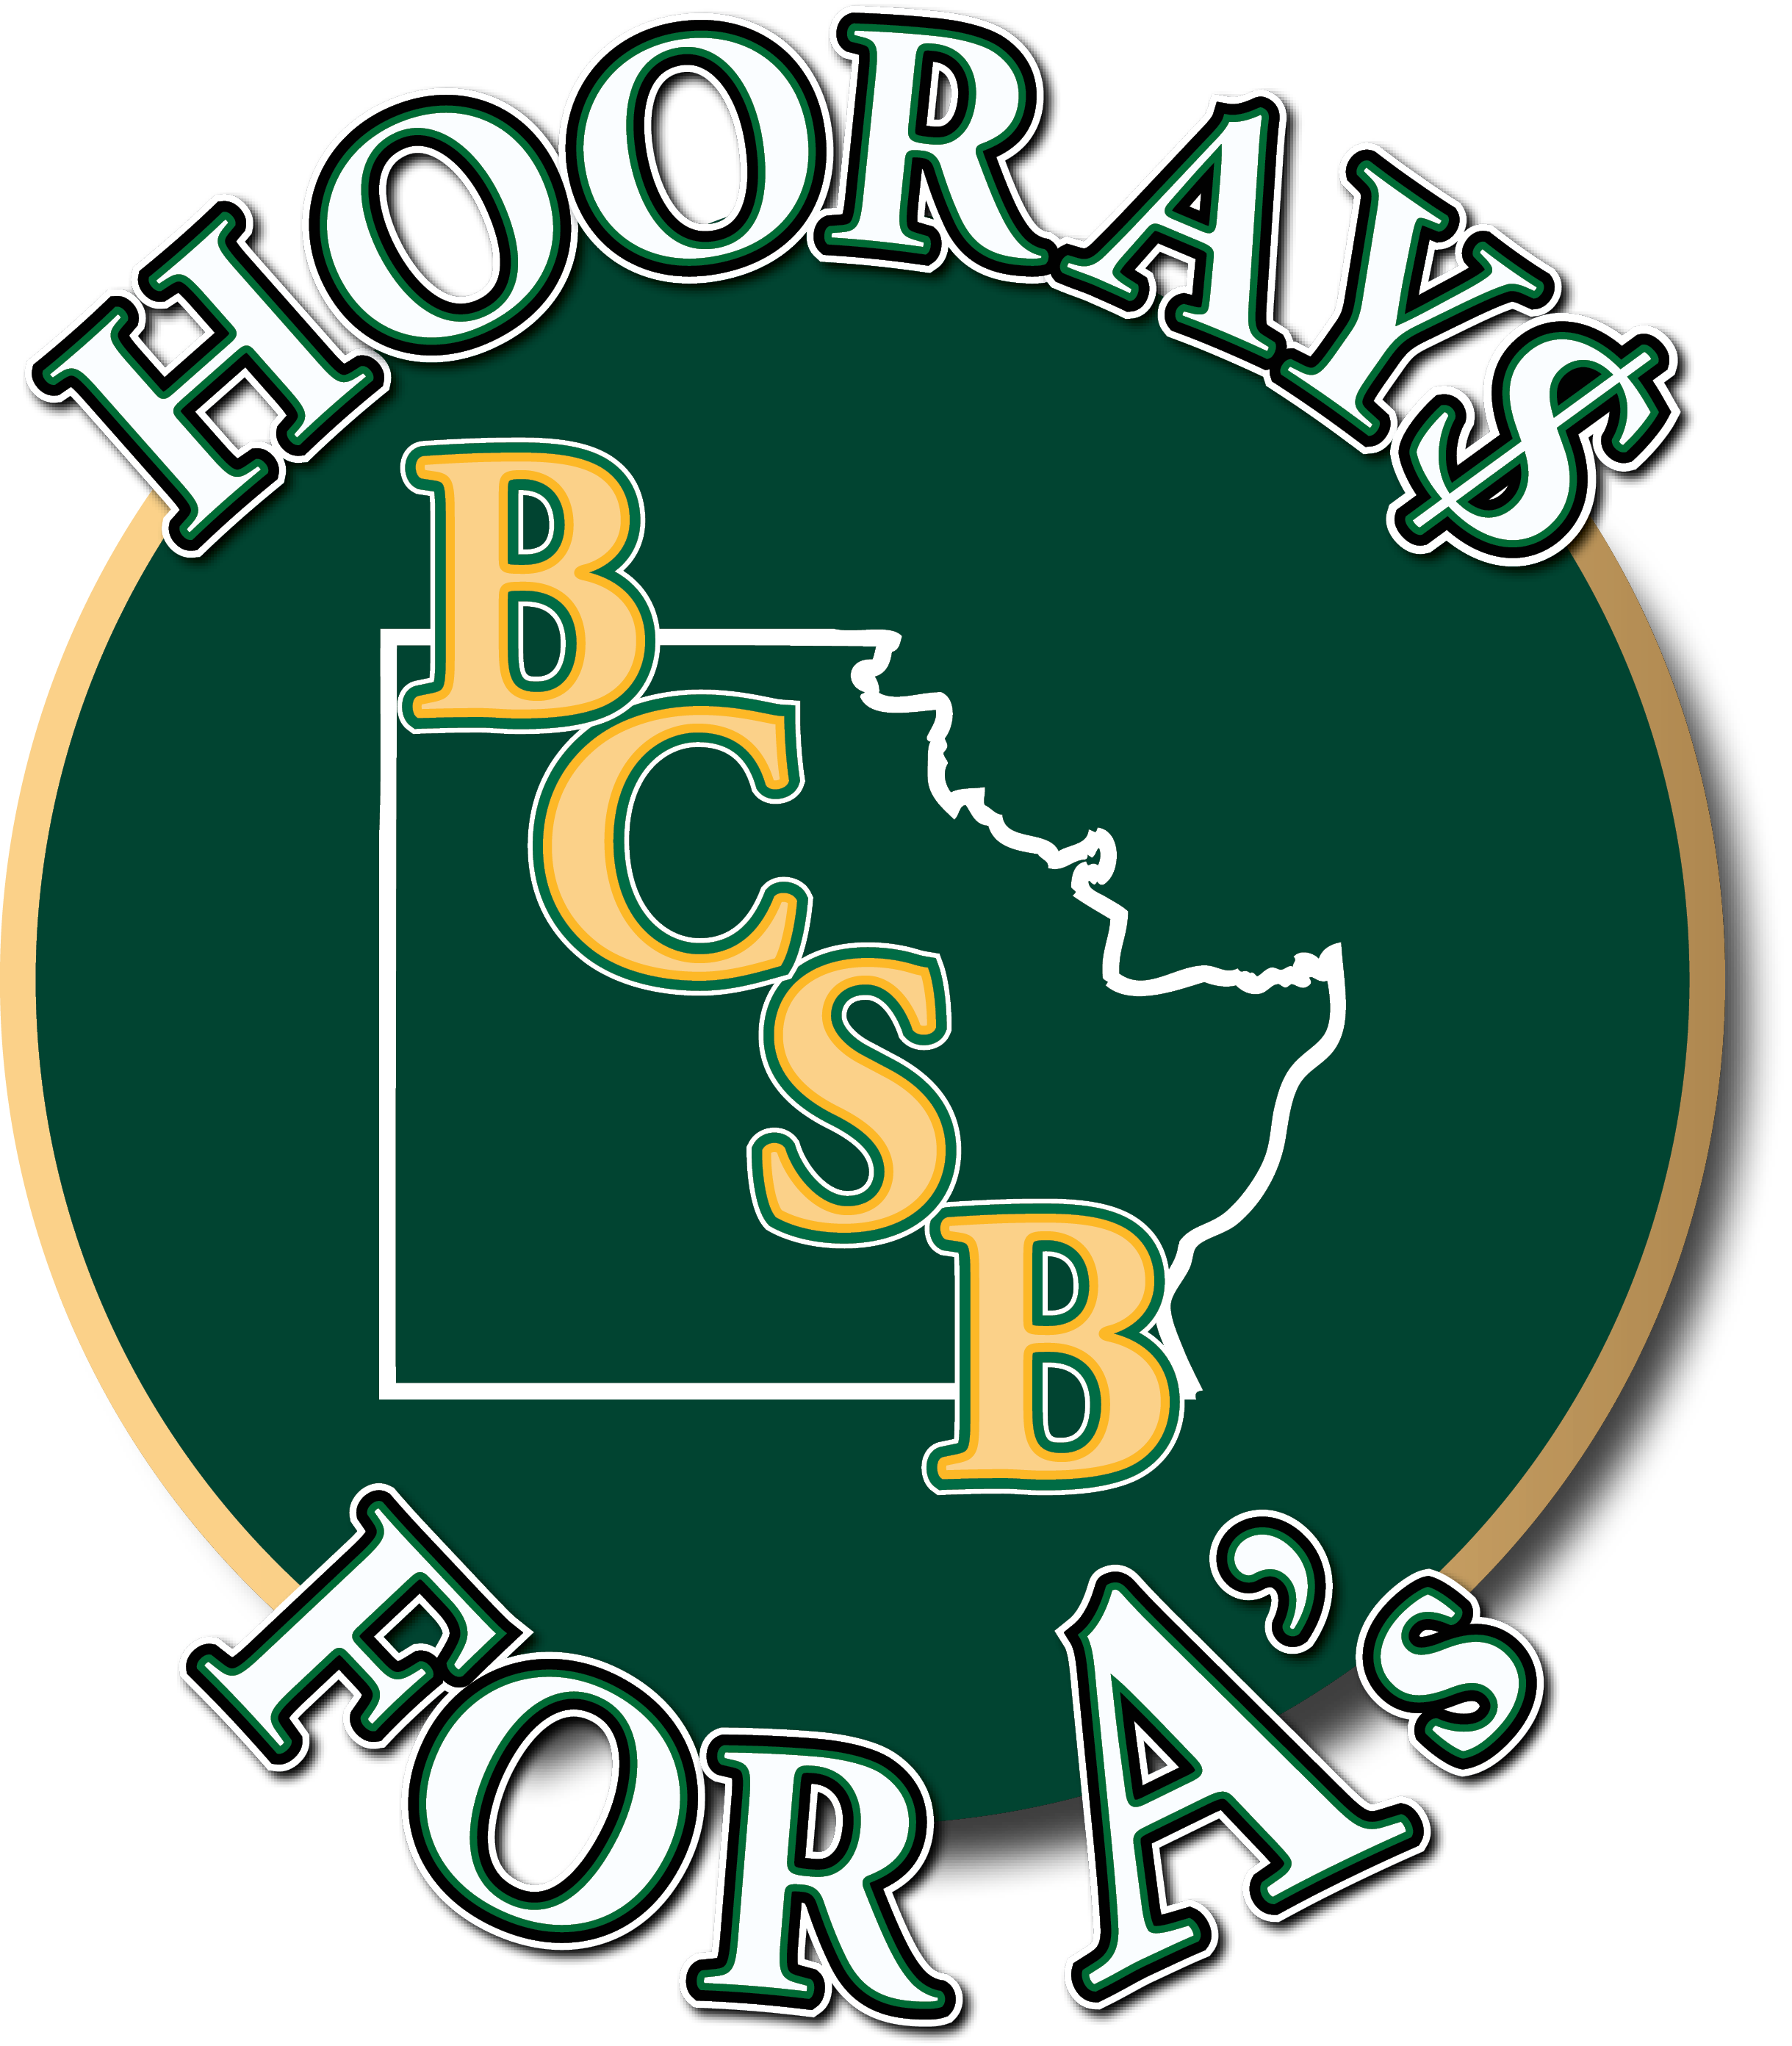 BCSB Hoorays for A's Logo